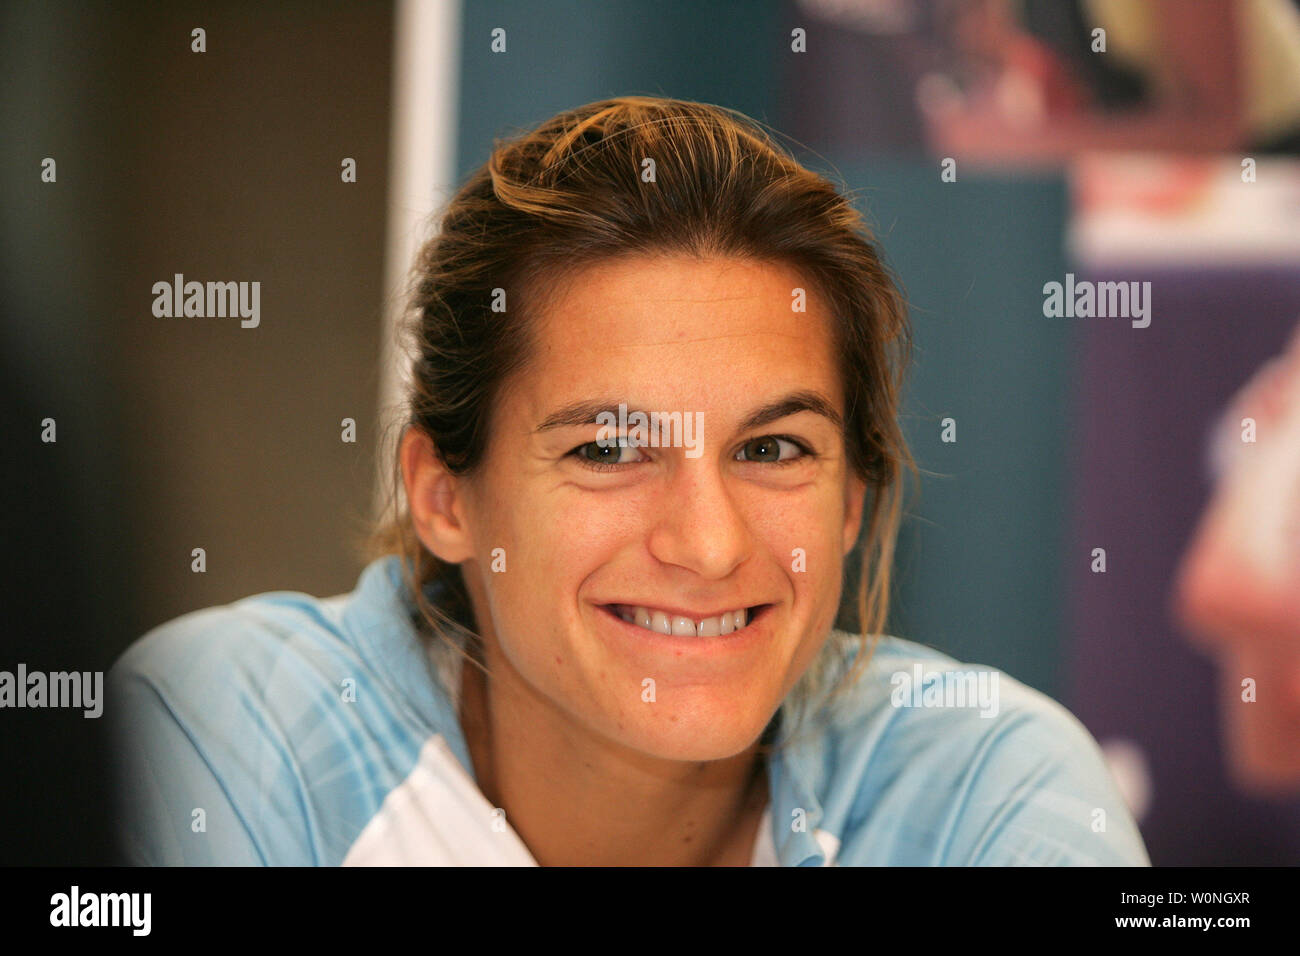 Amelie Mauresmo of France smiles during interviews on media day at the Zurich Open, WTA women's tennis tournament in Zurich, Switzerland on October 18, 2005.  Mauresmo is currently ranked number four on the WTA tour and competes with other top seeds including Lindsay Davenport, Mary Pierce, and Elena Dementieva. Finals are on Sunday, October 23, 2005.  (UPI Photo/Tom Theobald) Stock Photo